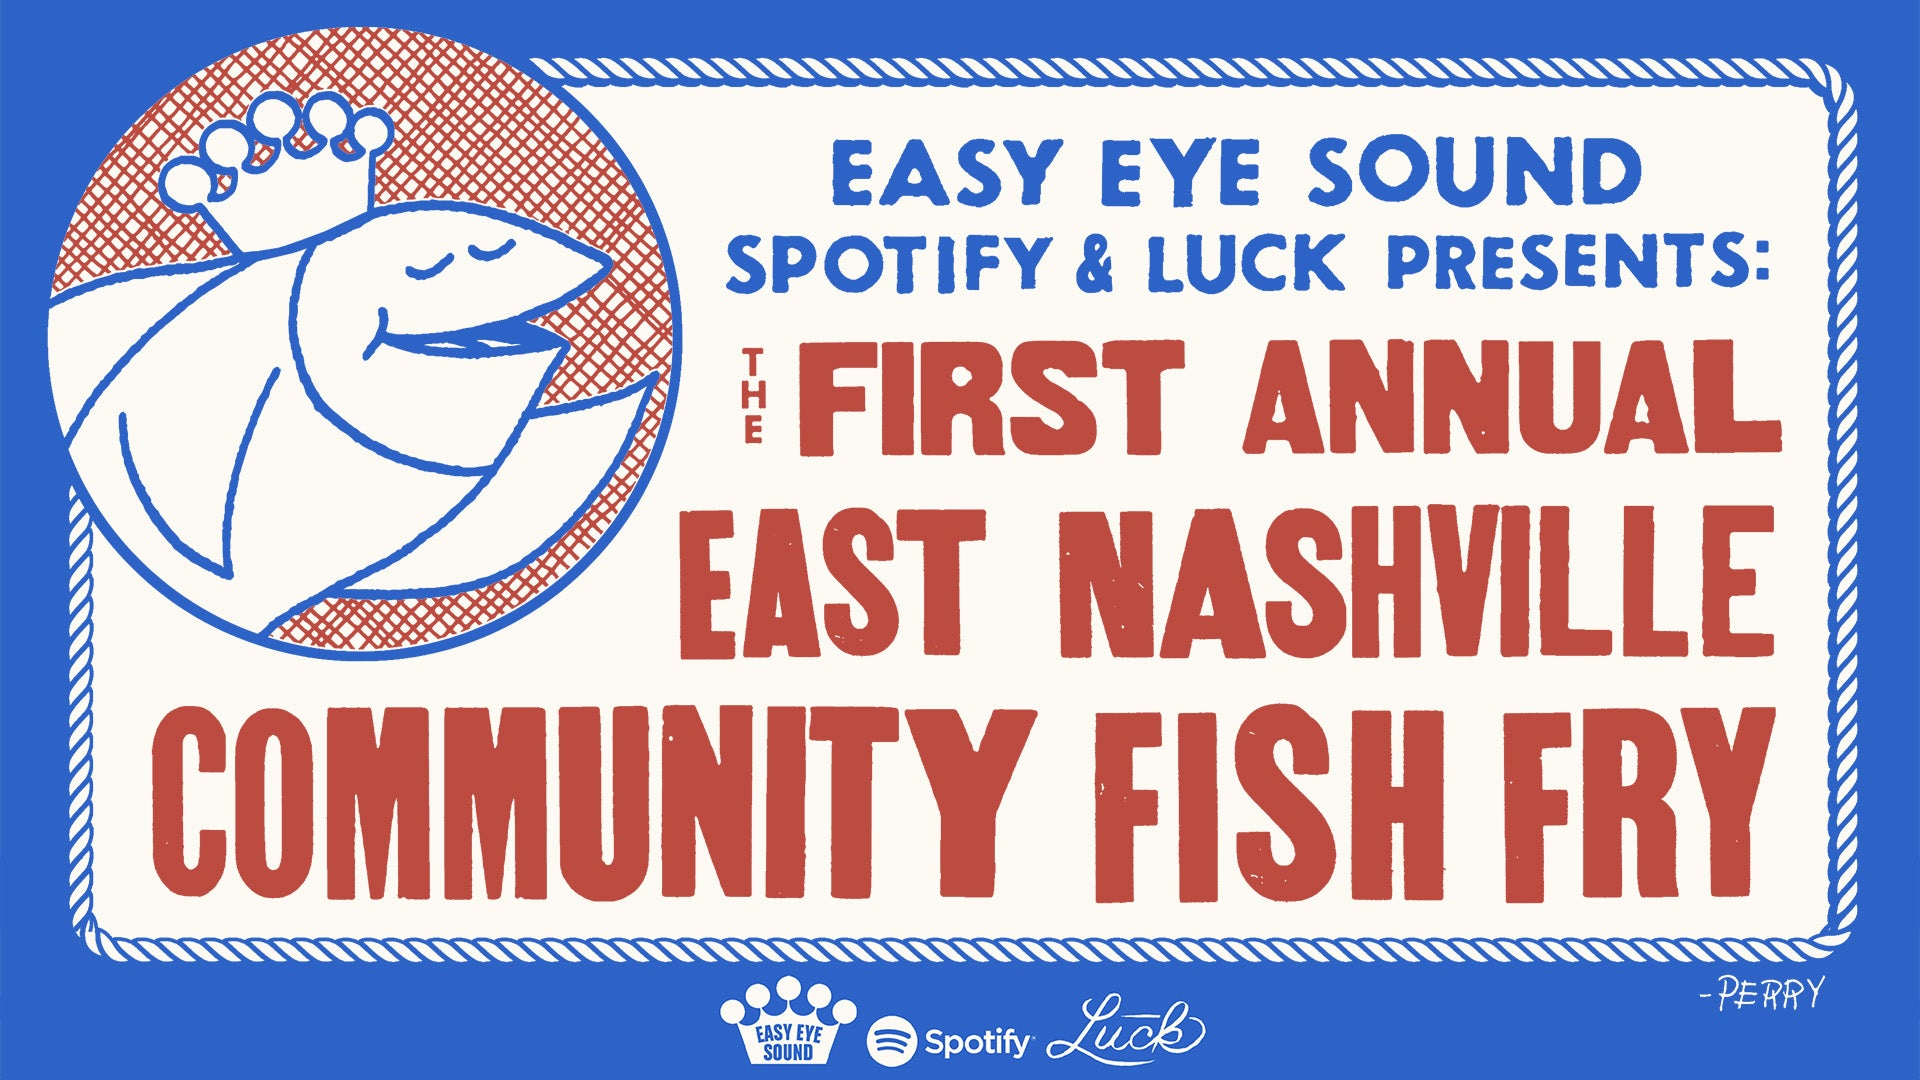 EASY EYE SOUND THROWS THE BEST AMERICANAFEST EVENT OF 2022